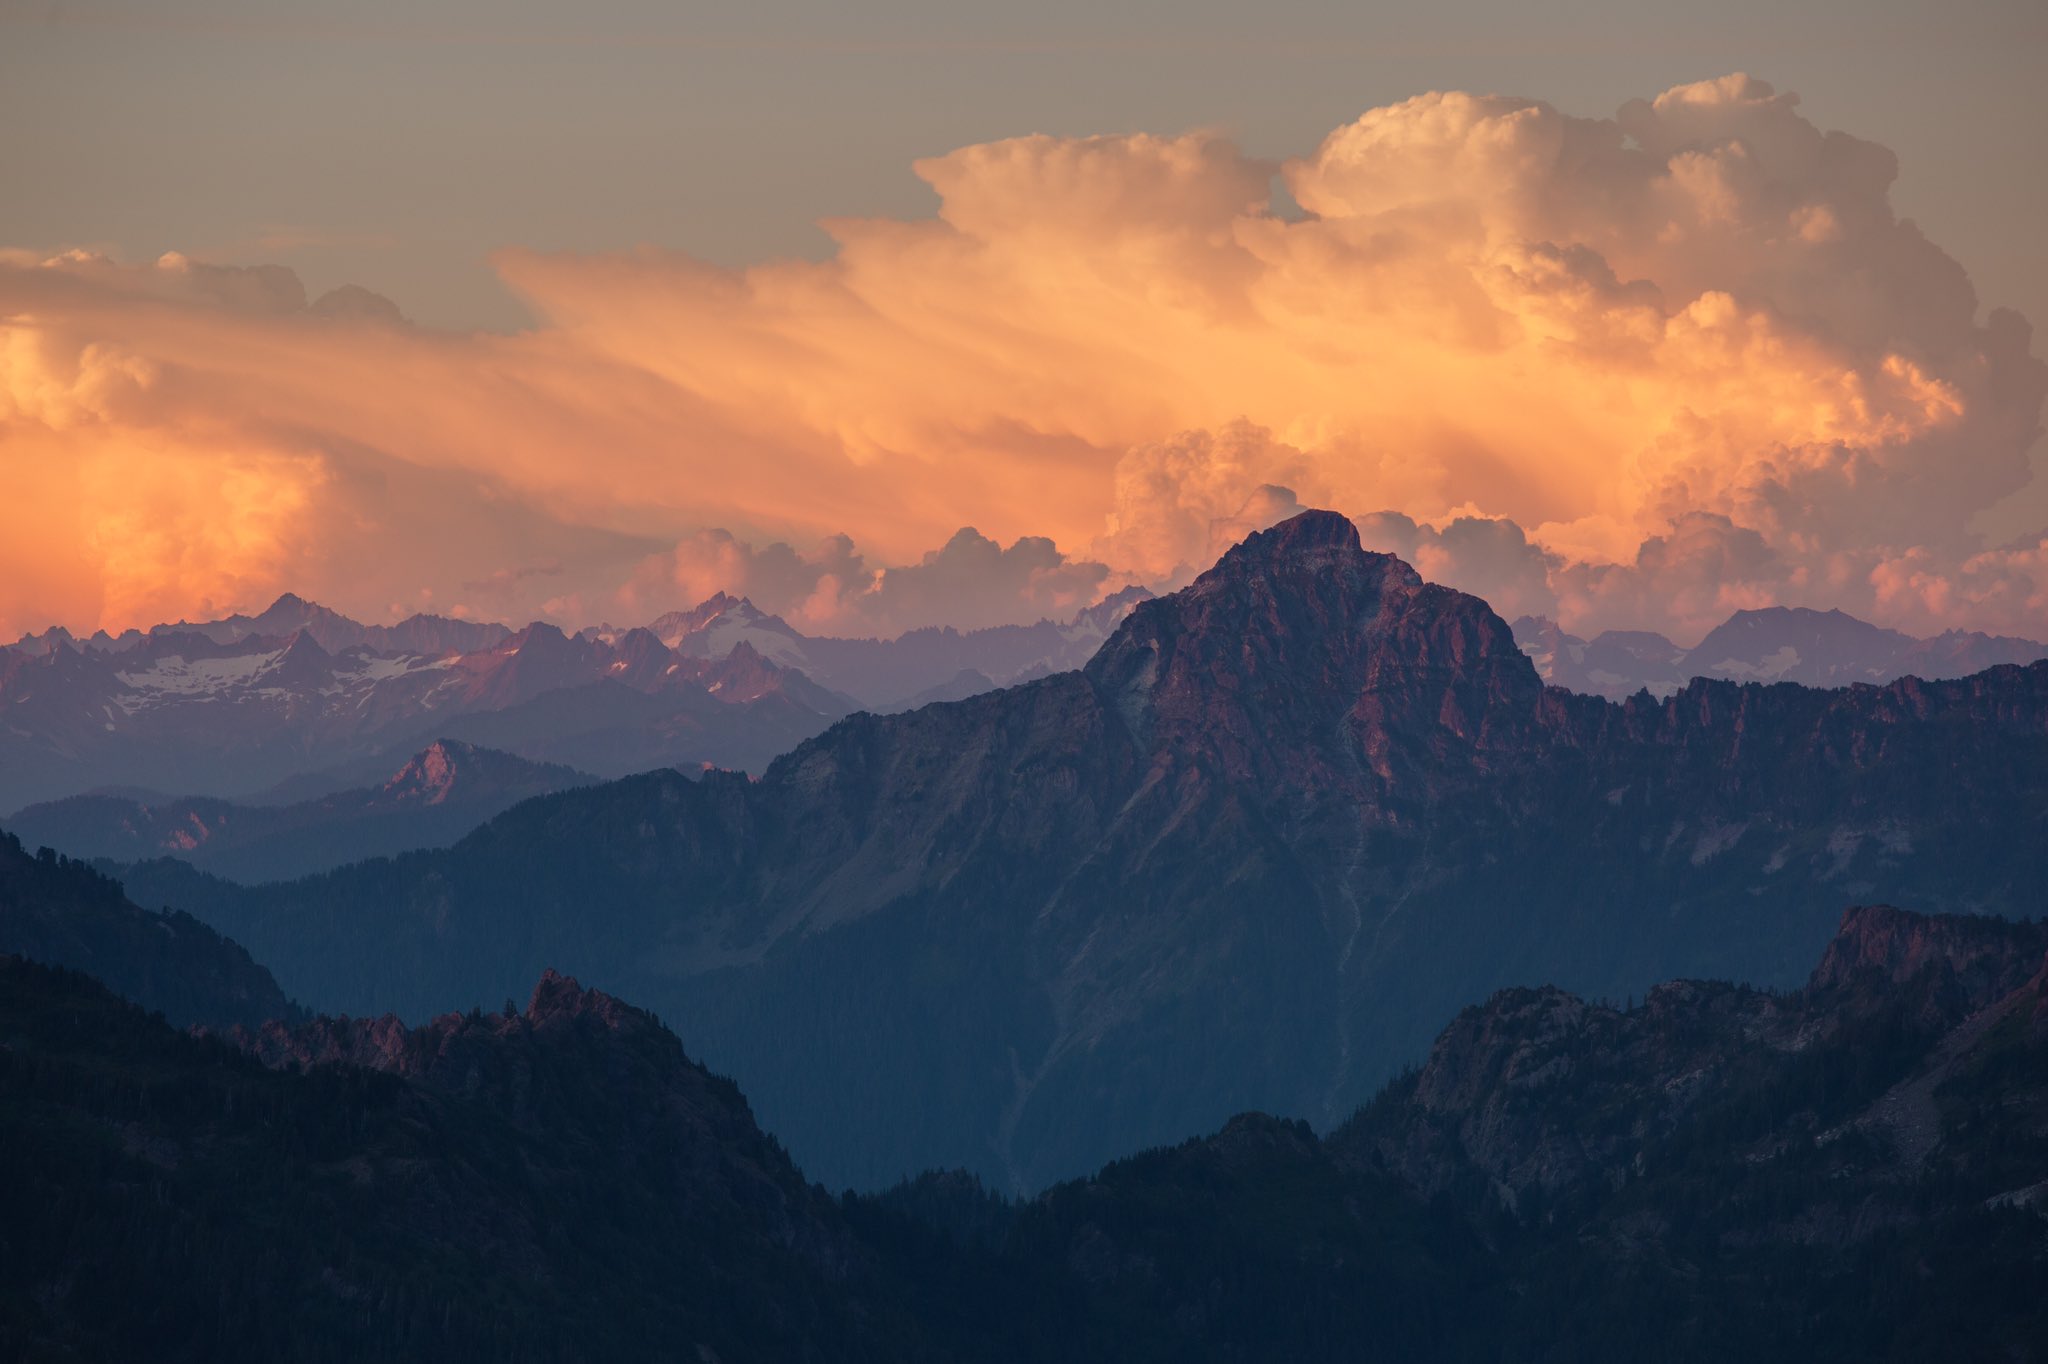 General 2048x1364 landscape nature mountains clouds sunset glow